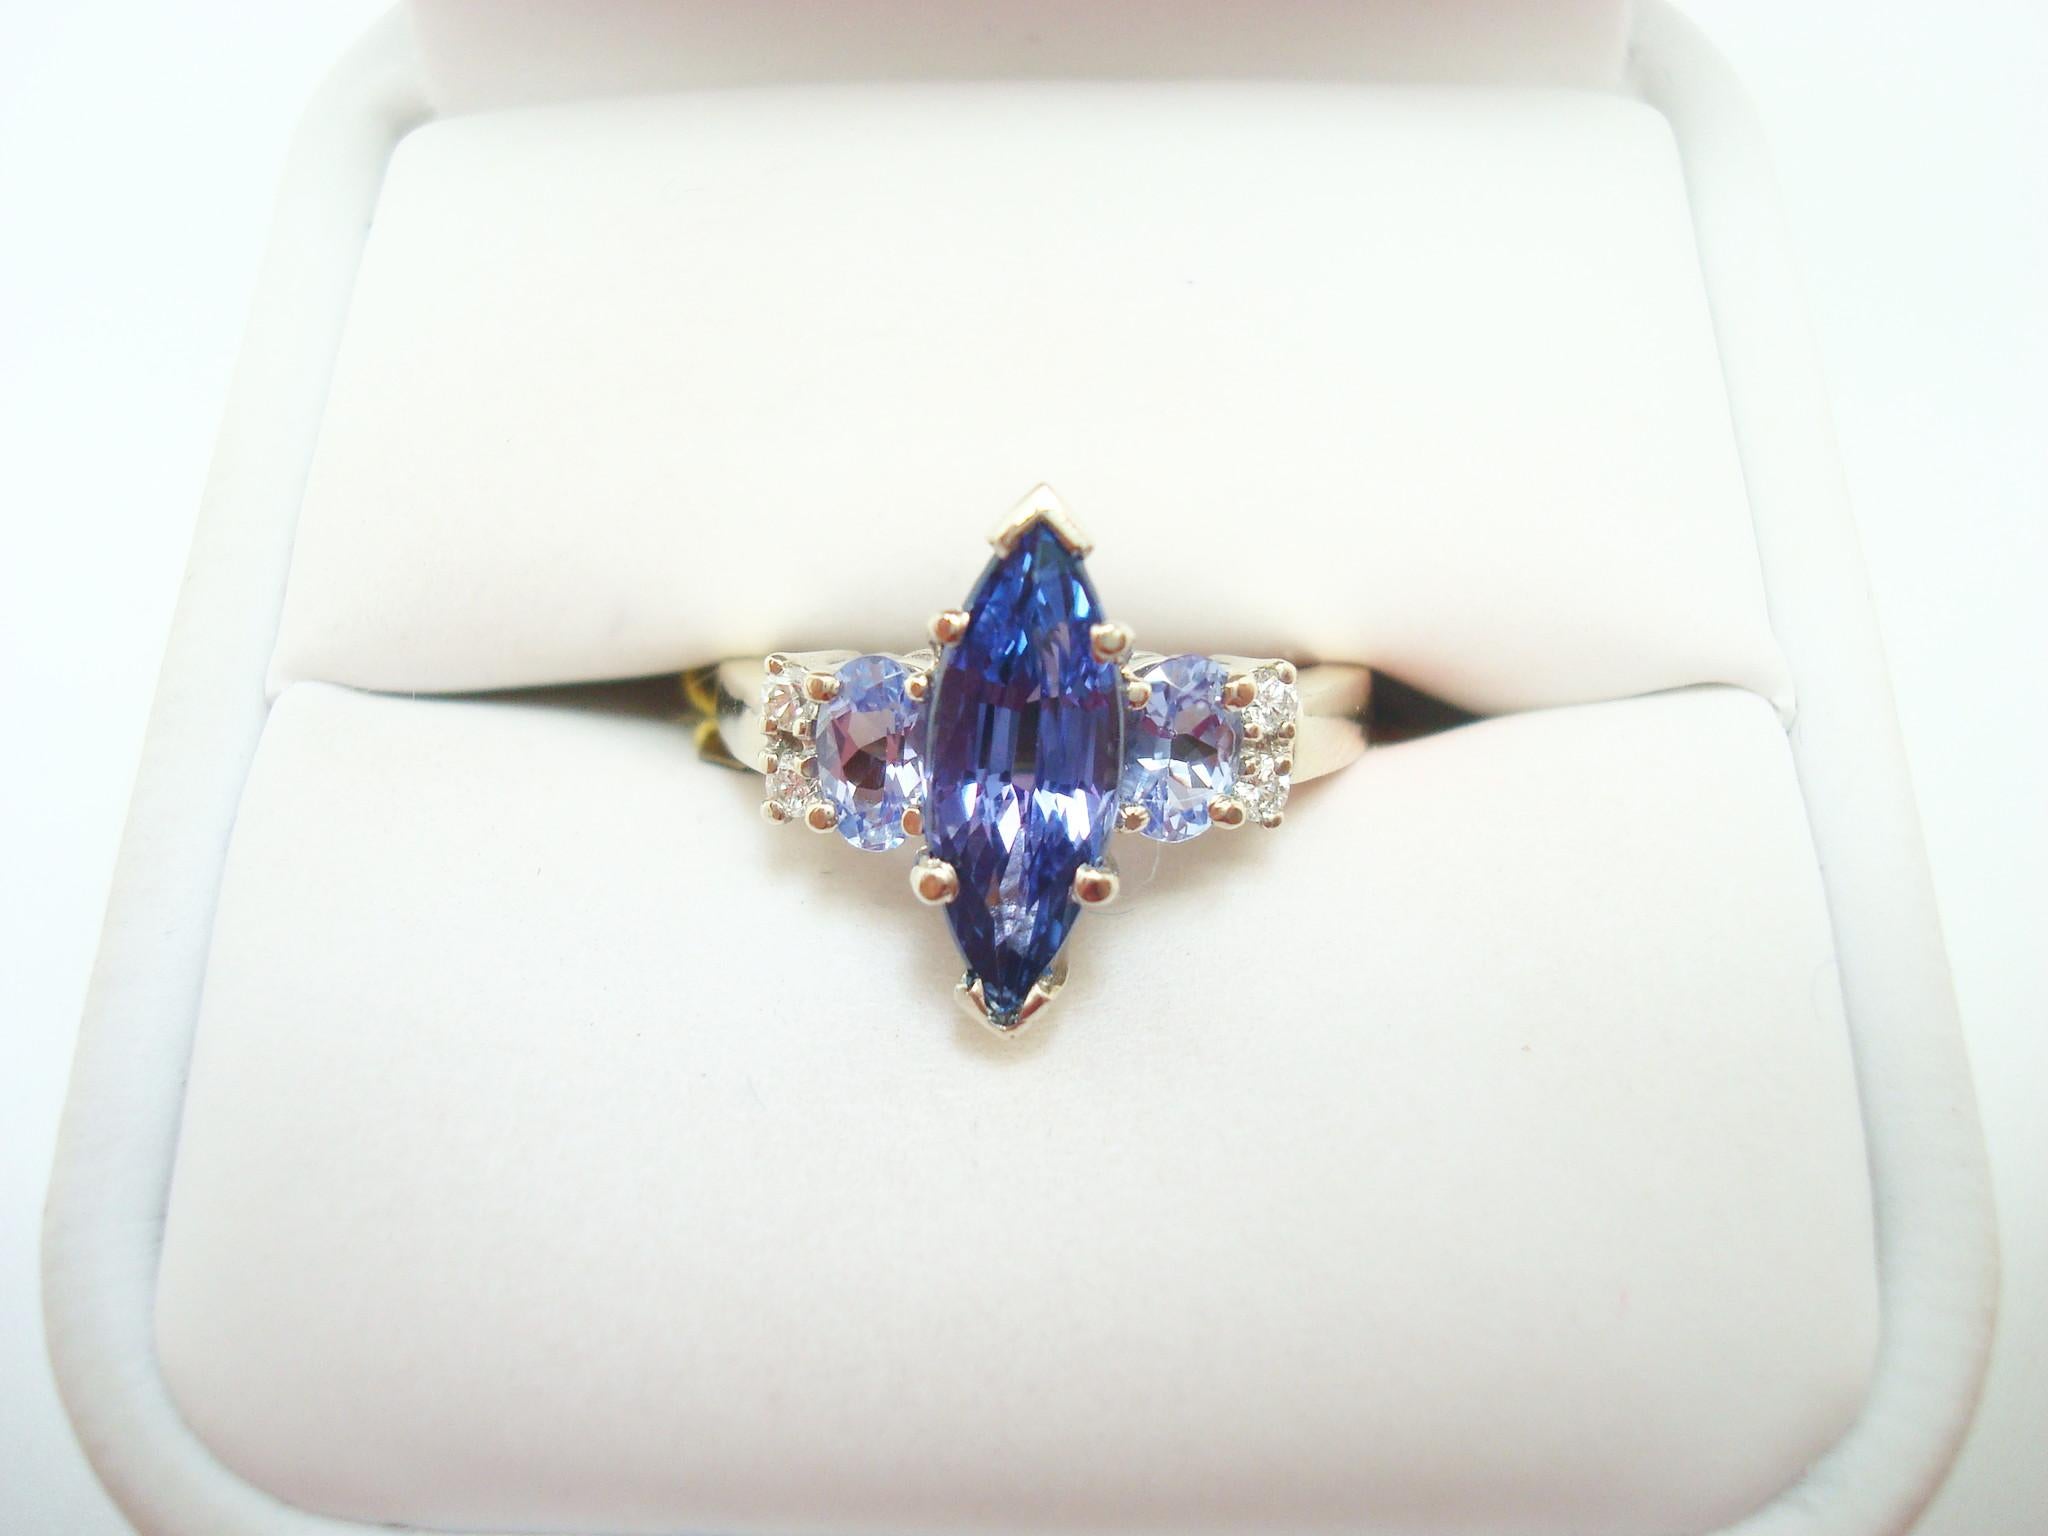 10K GOLD MARQUISE 1.68CT GENUINE NATURAL TANZANITE RING WITH DIAMONDS (#2643)

Captivating 10K white gold tanzanite and diamond ring featuring a ravishing marquise center tanzanite that is approximately 1.68 carats and it measures 14x5mm.  Set on